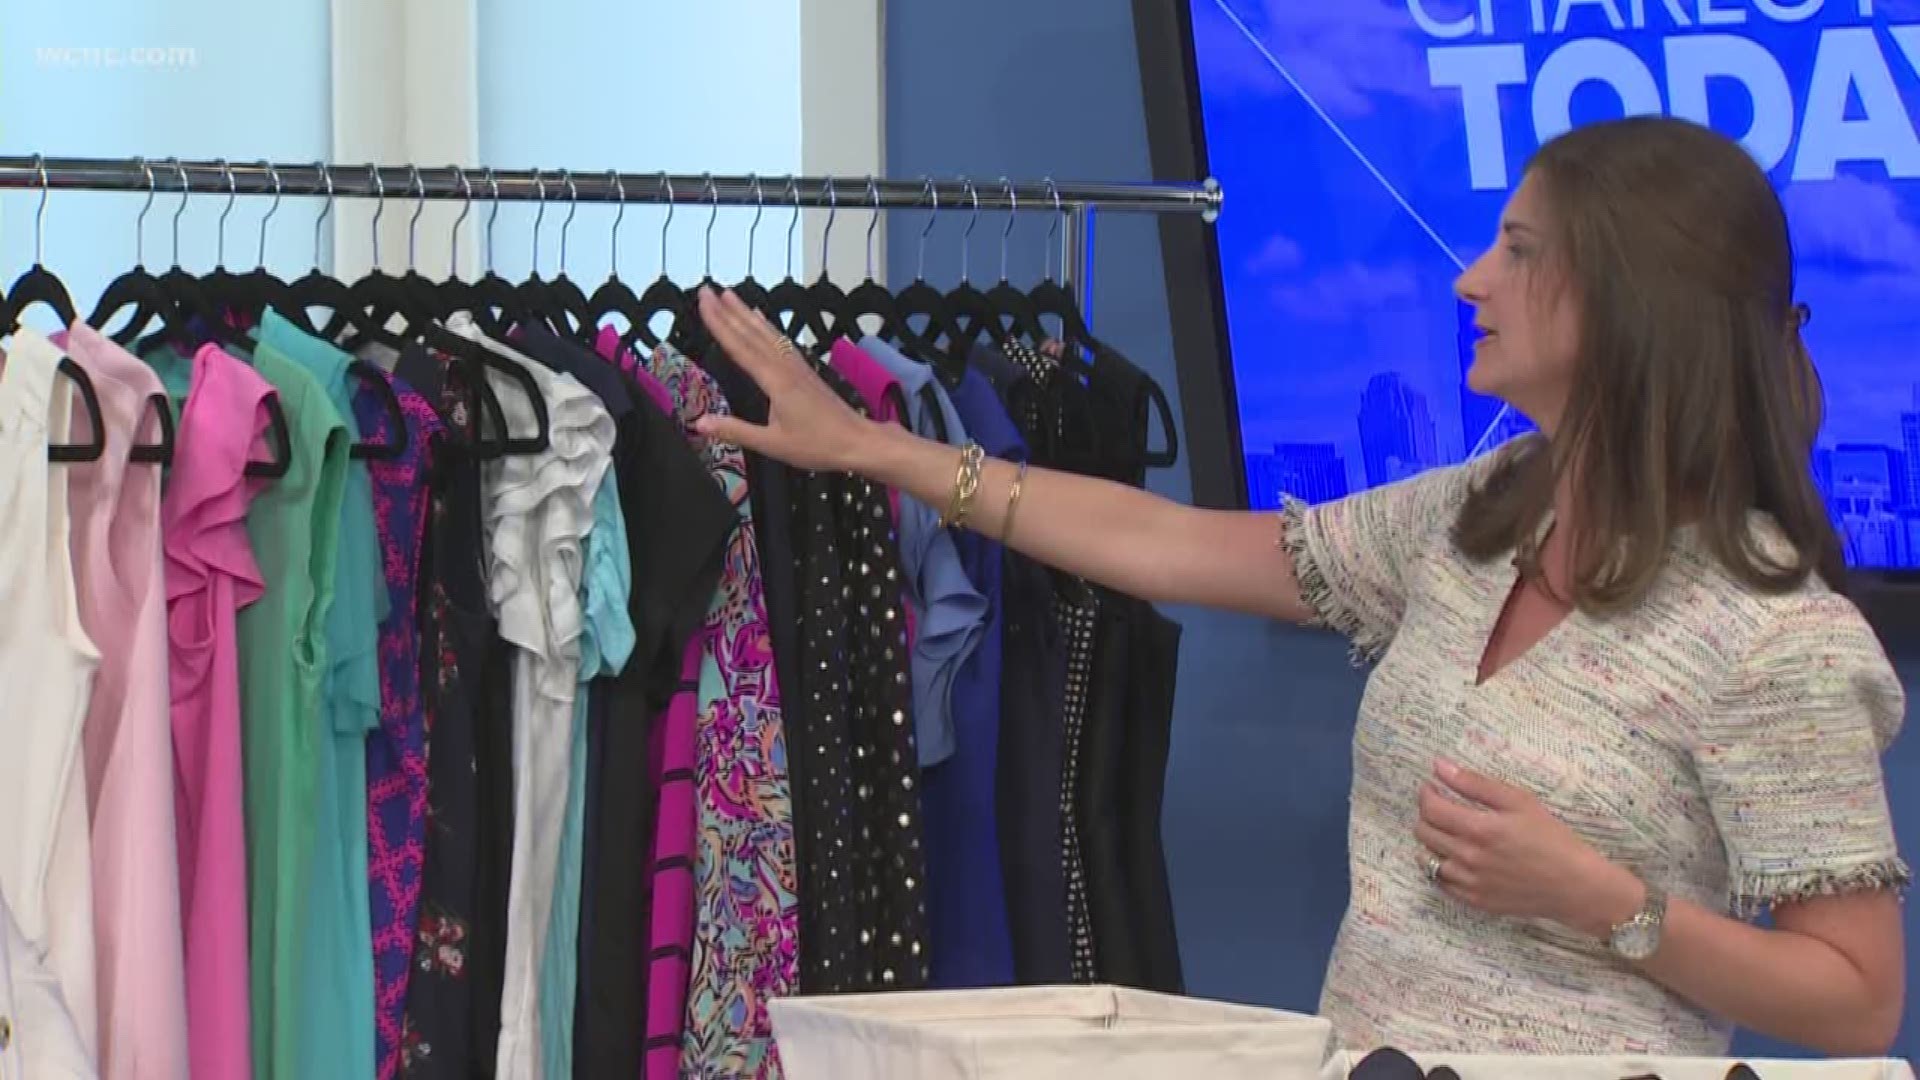 Professional organizer, Bethany Mann, shows us how reorganizing our closets doesn’t have to be scary. Check out her tips for storing clothes and accessories.